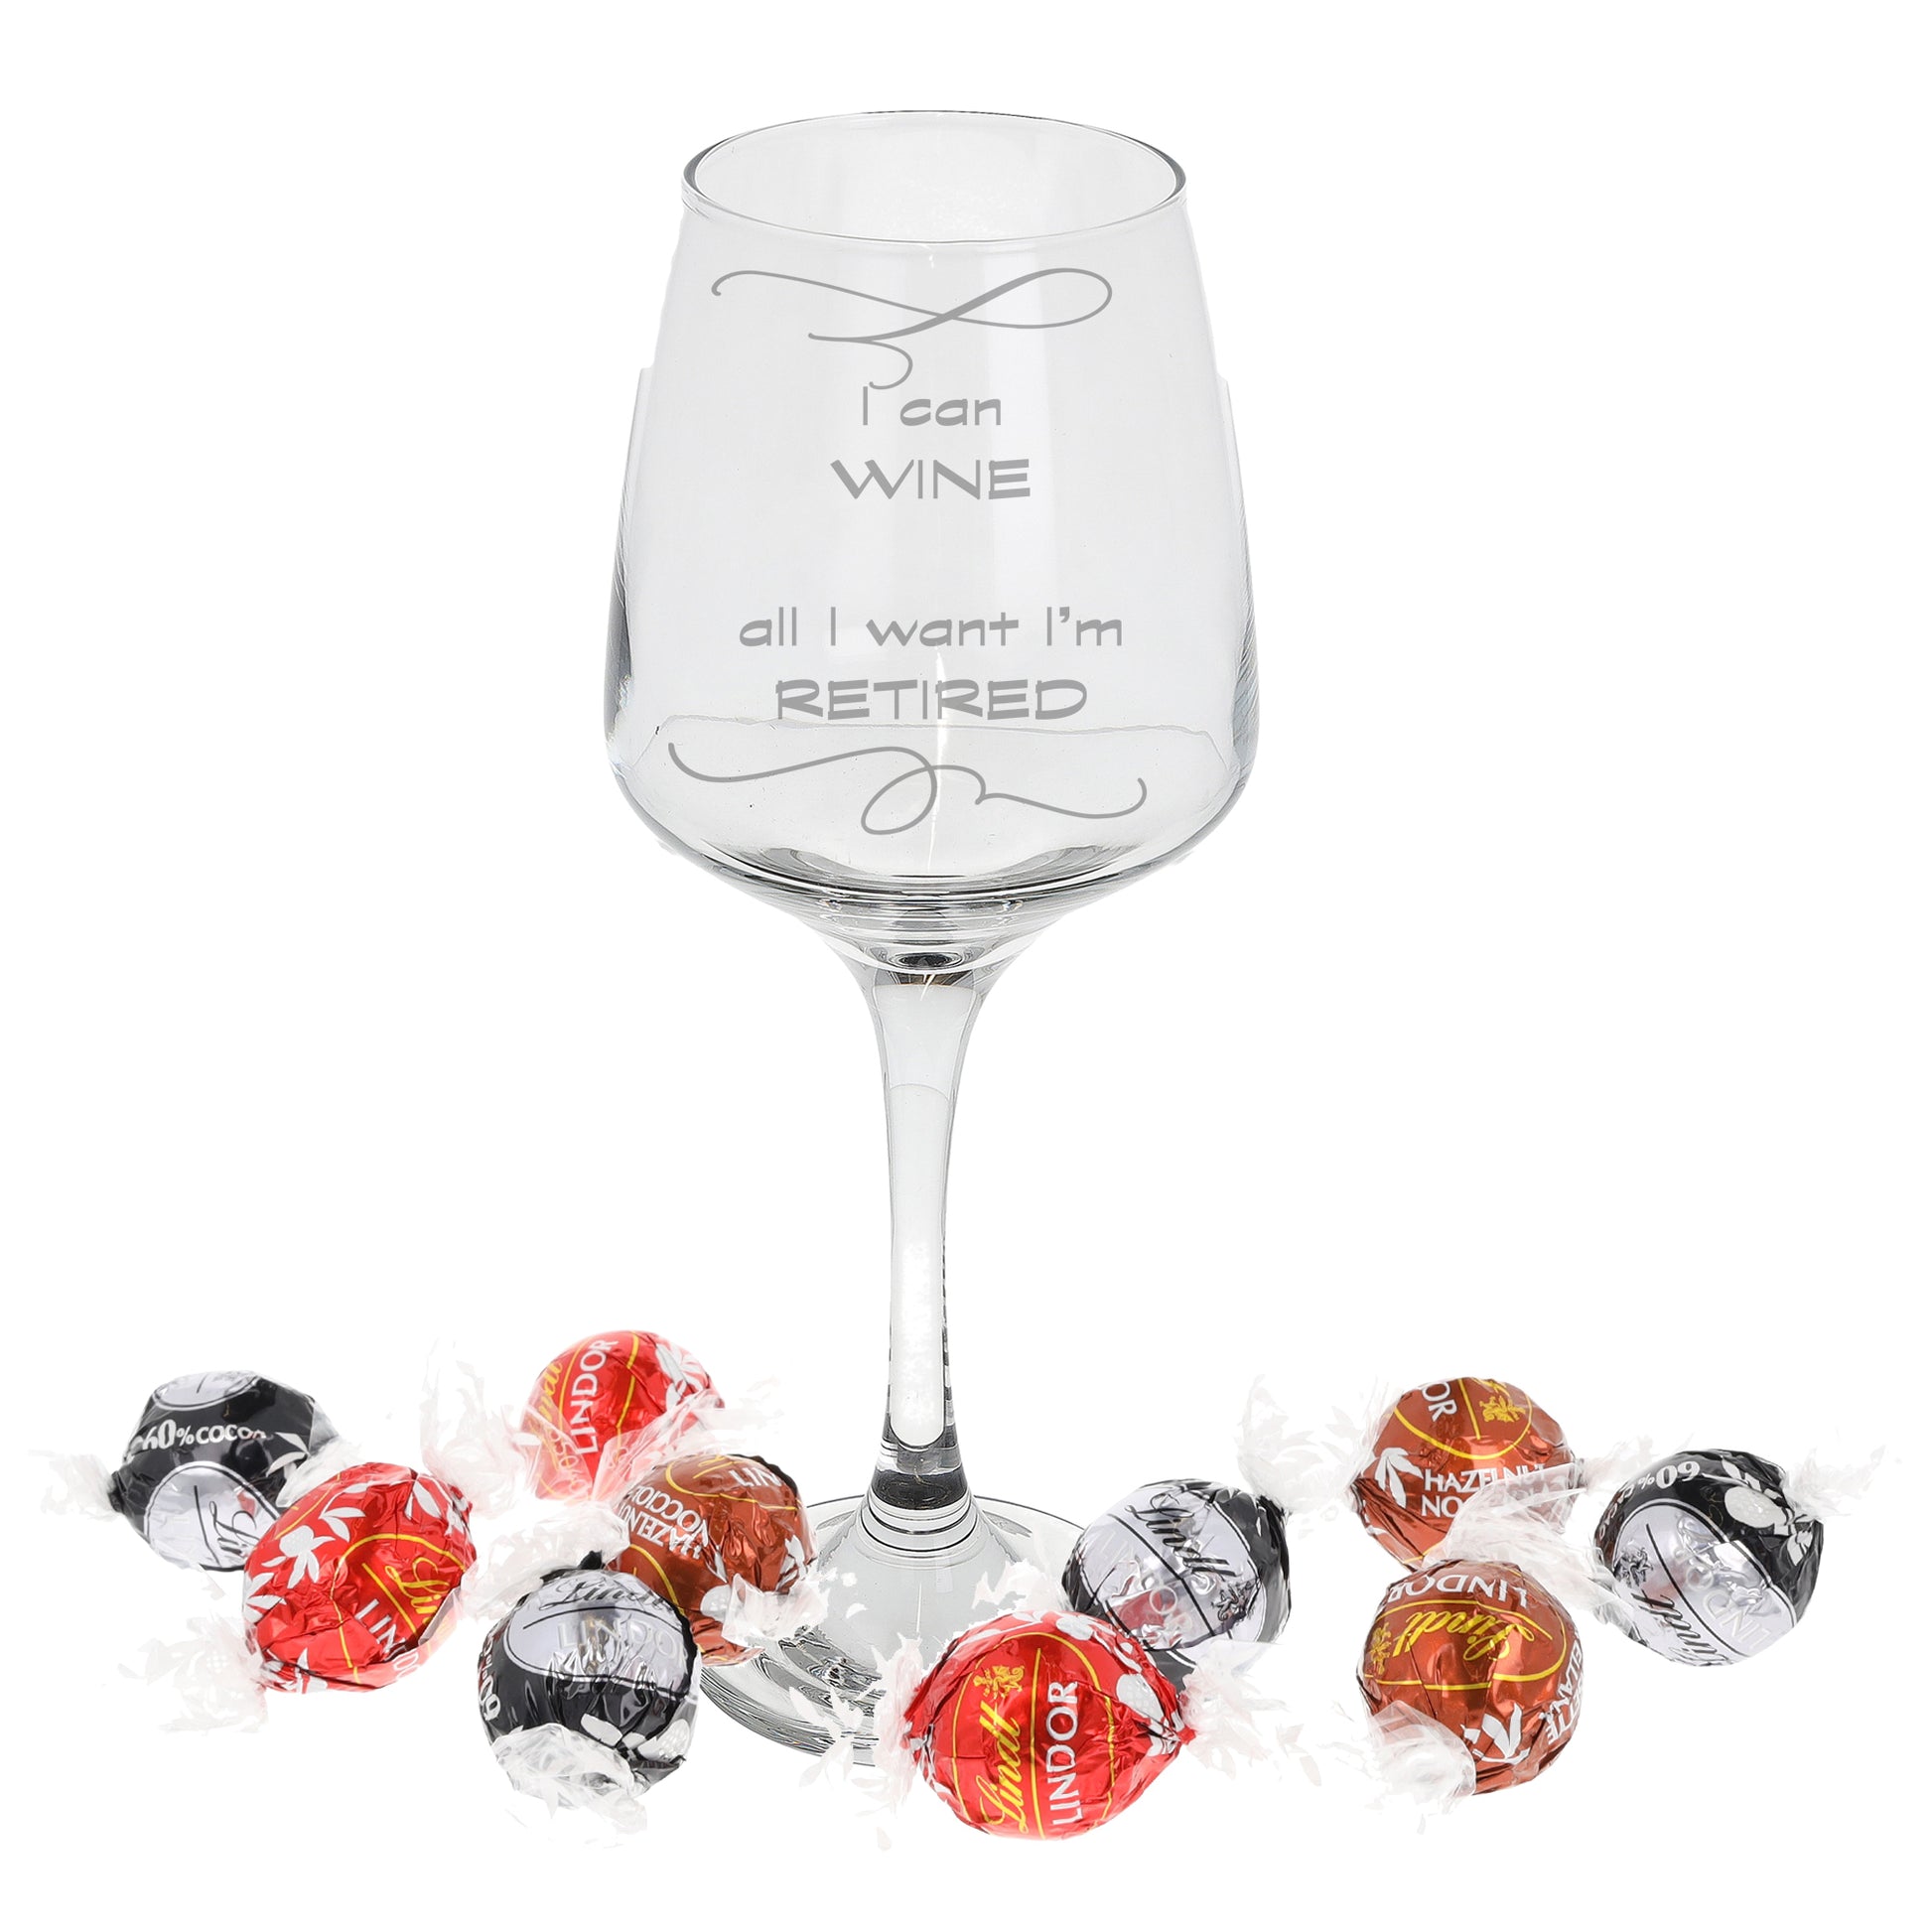 Personalised Engraved Wine Glass Retirement Gift  - Always Looking Good - Filled- Lindt Chocolates  